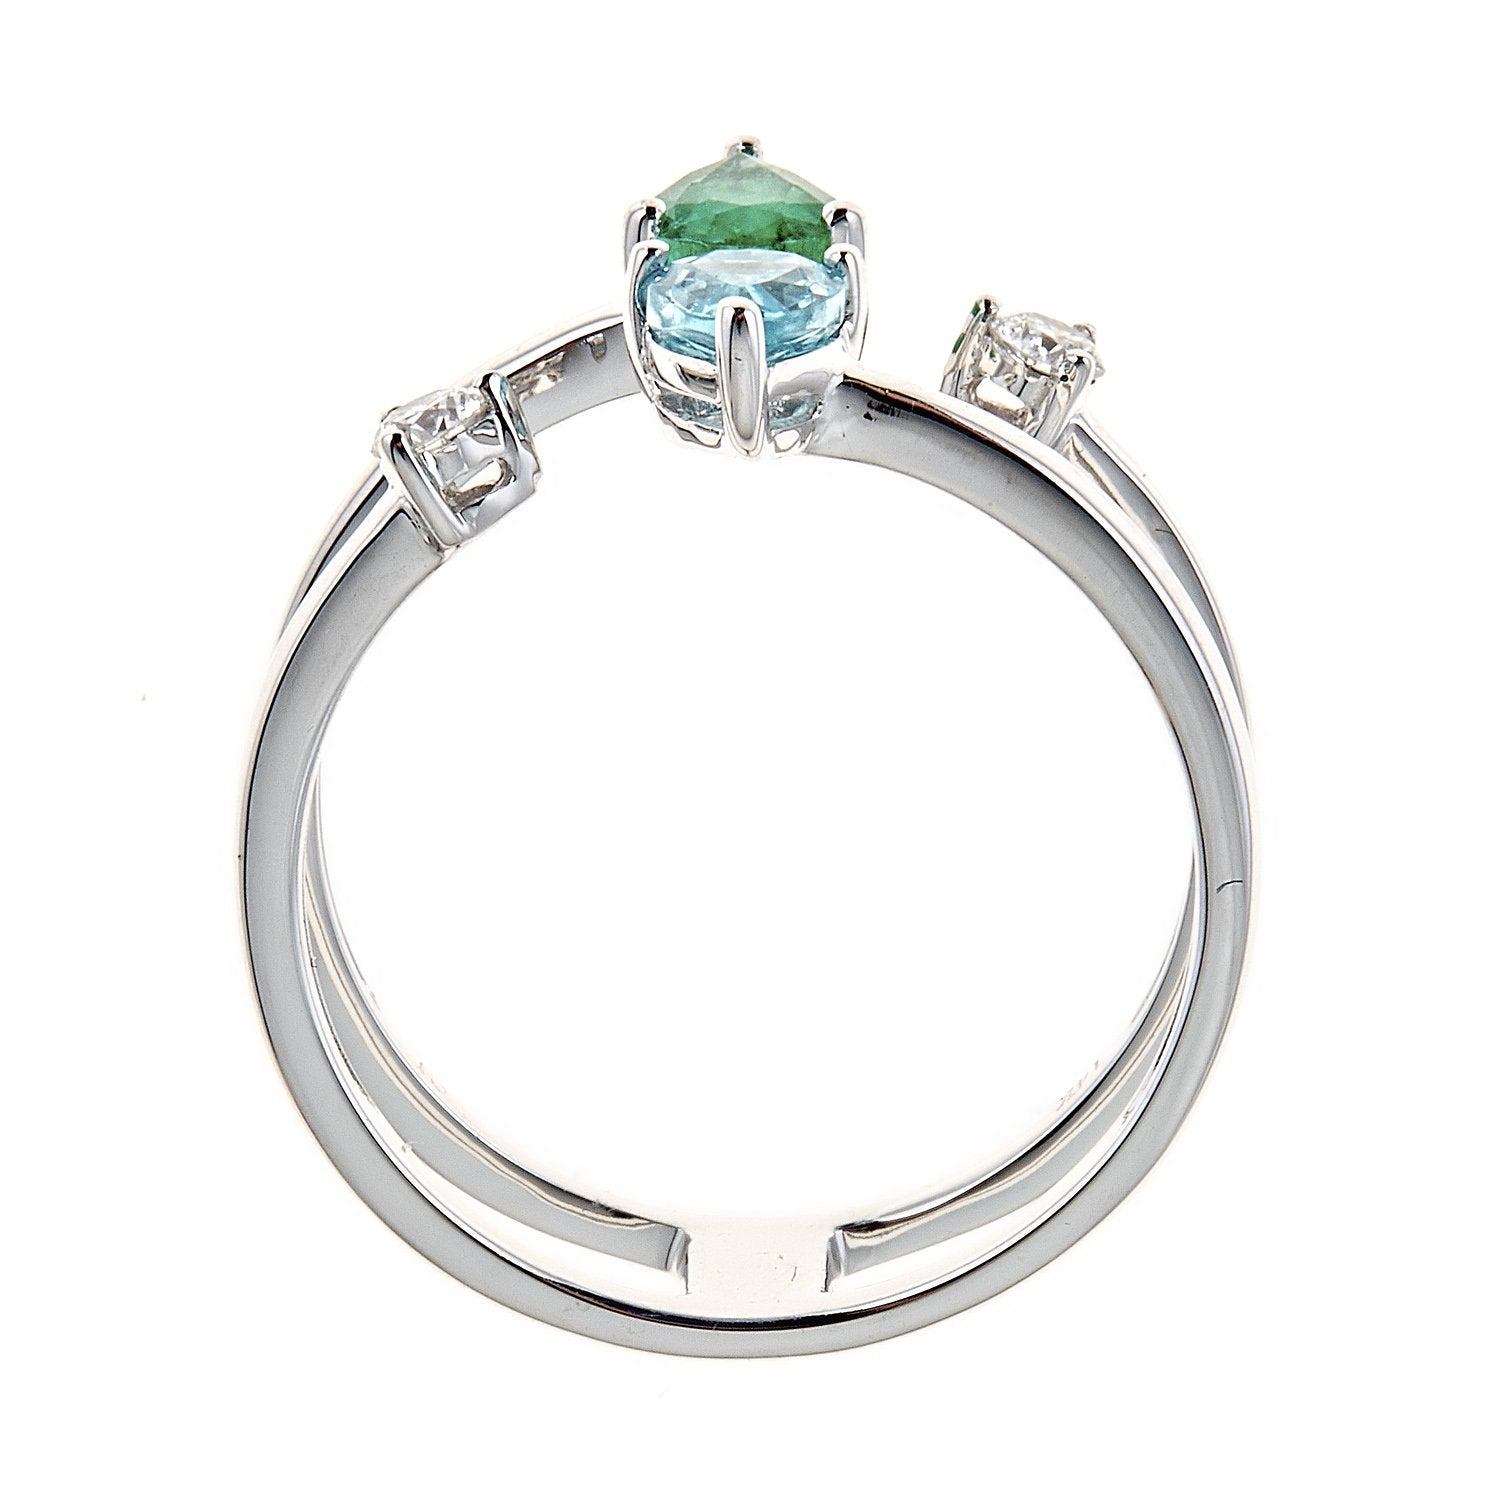 14K White Gold Emerald, Apatite and Diamond Ring by Anika and August 3